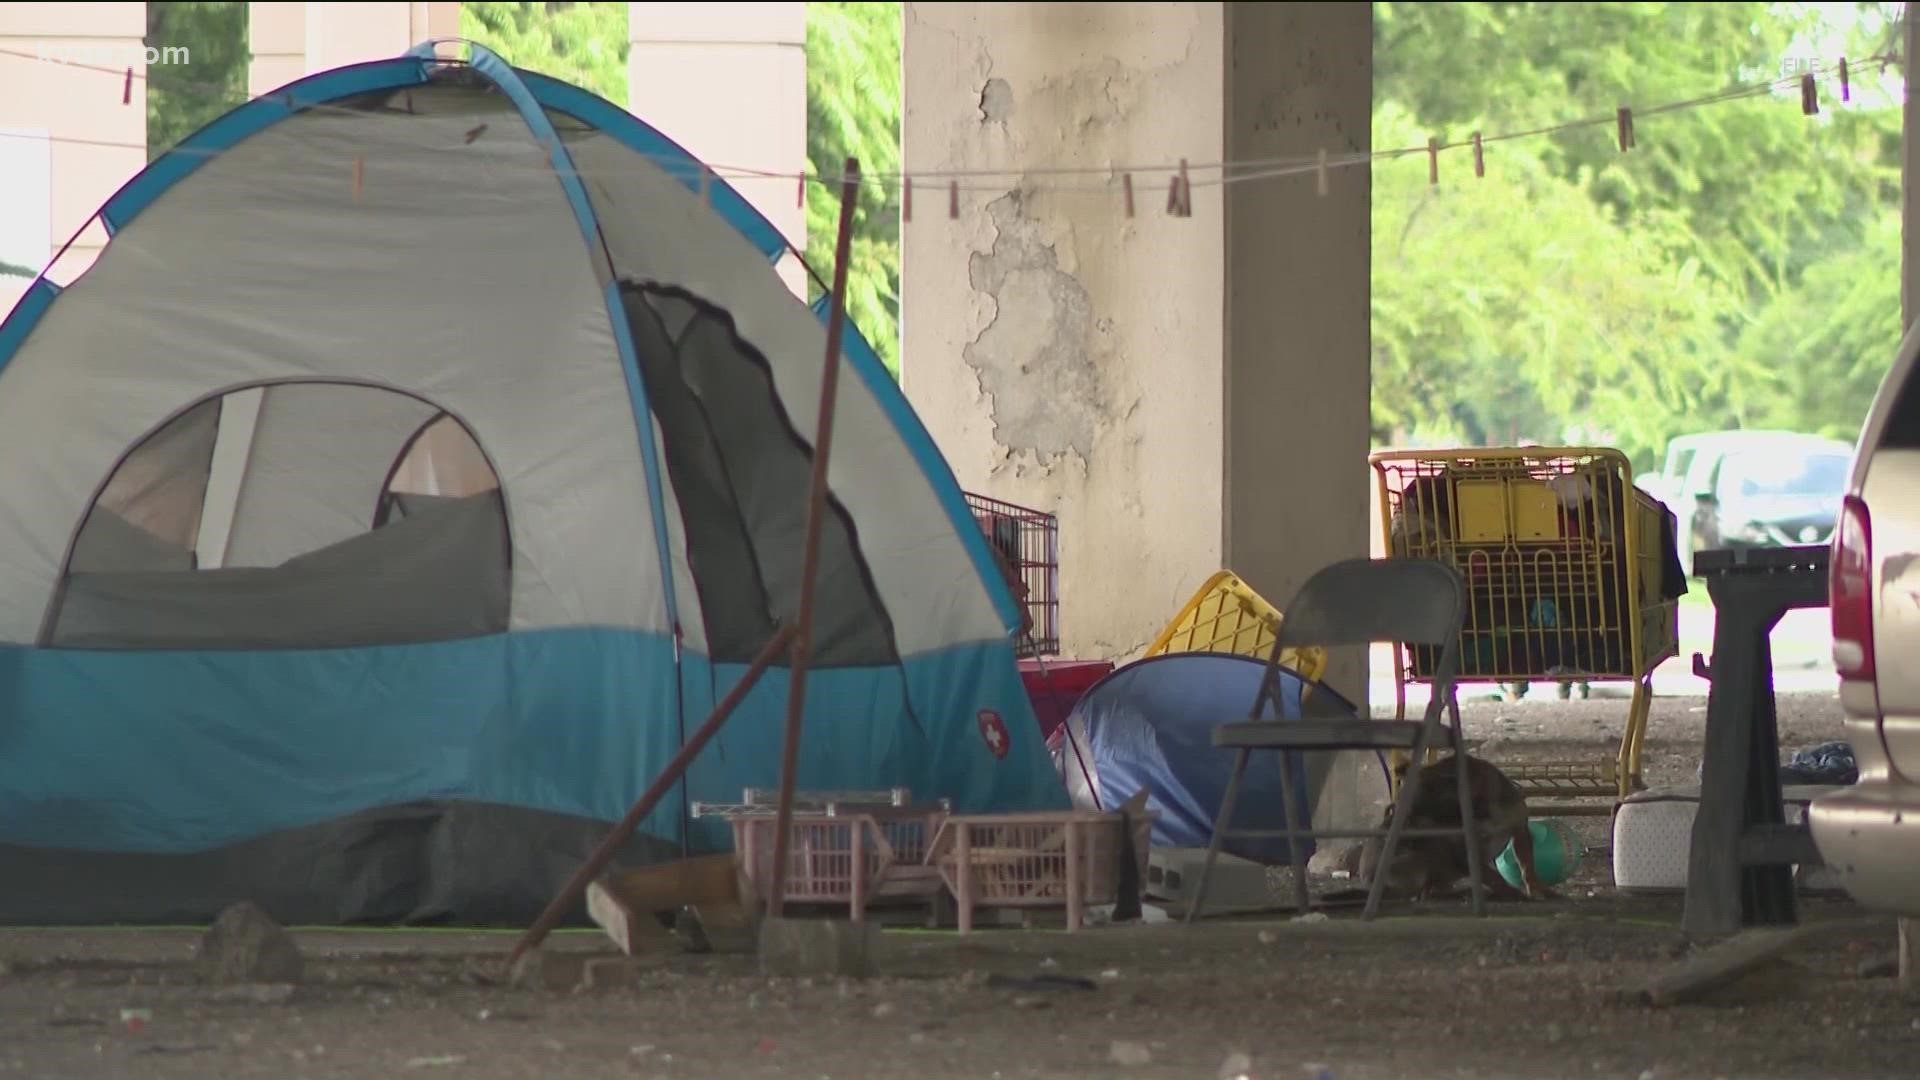 More than a dozen people who were living on the streets are now in a safer temporary shelter.